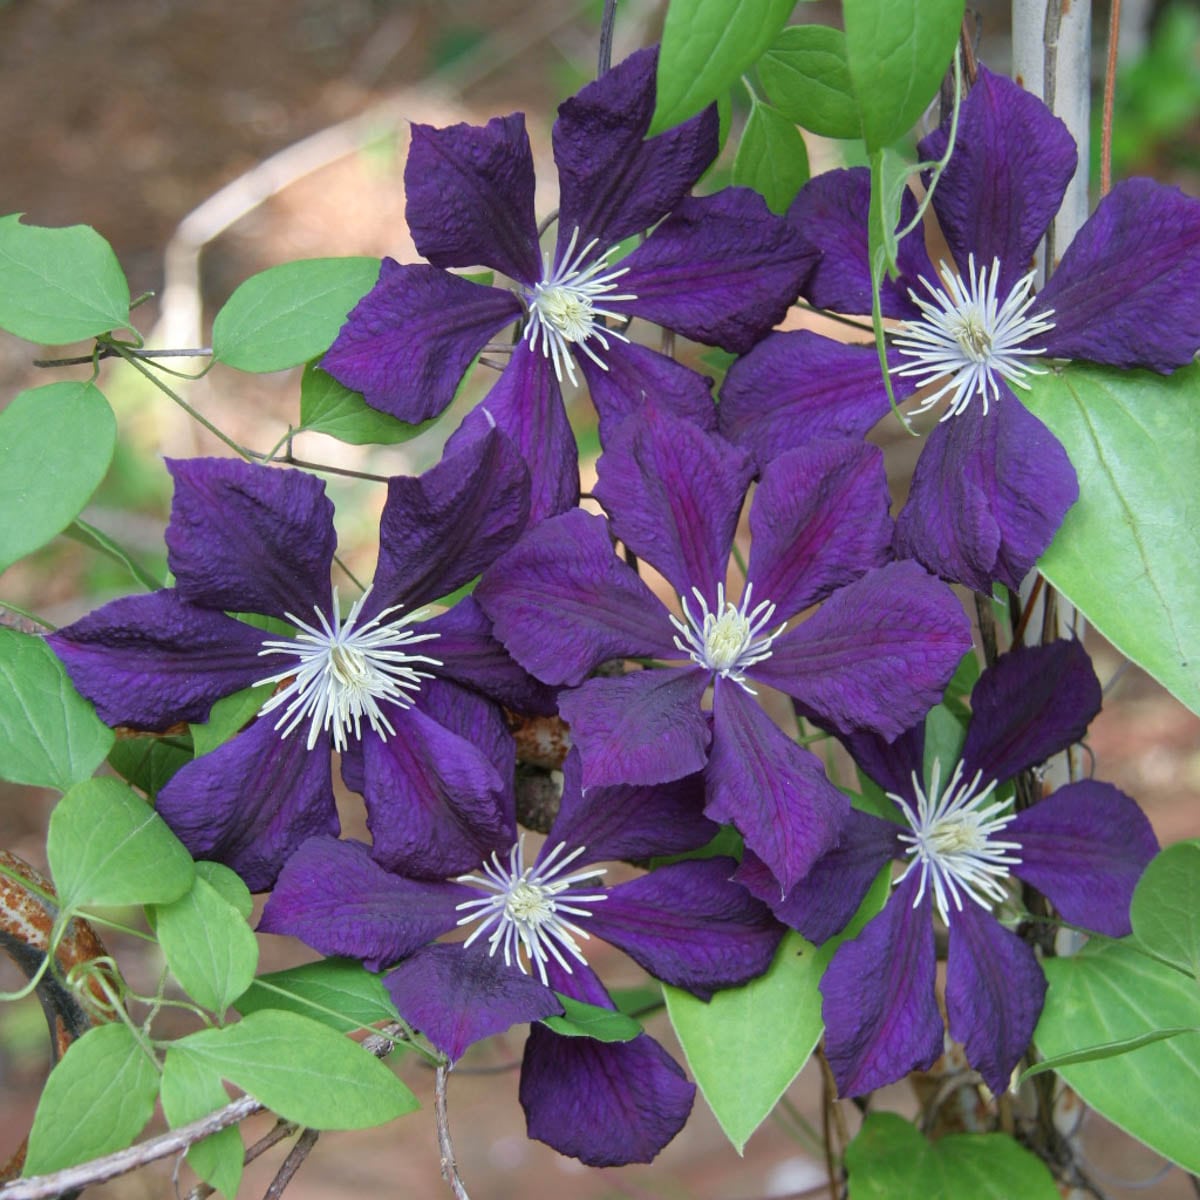 Spring Hill Nurseries Etoile Violette Clematis Vining Perennial Plant in  1-Pack Bareroot in the Perennials department at Lowes.com